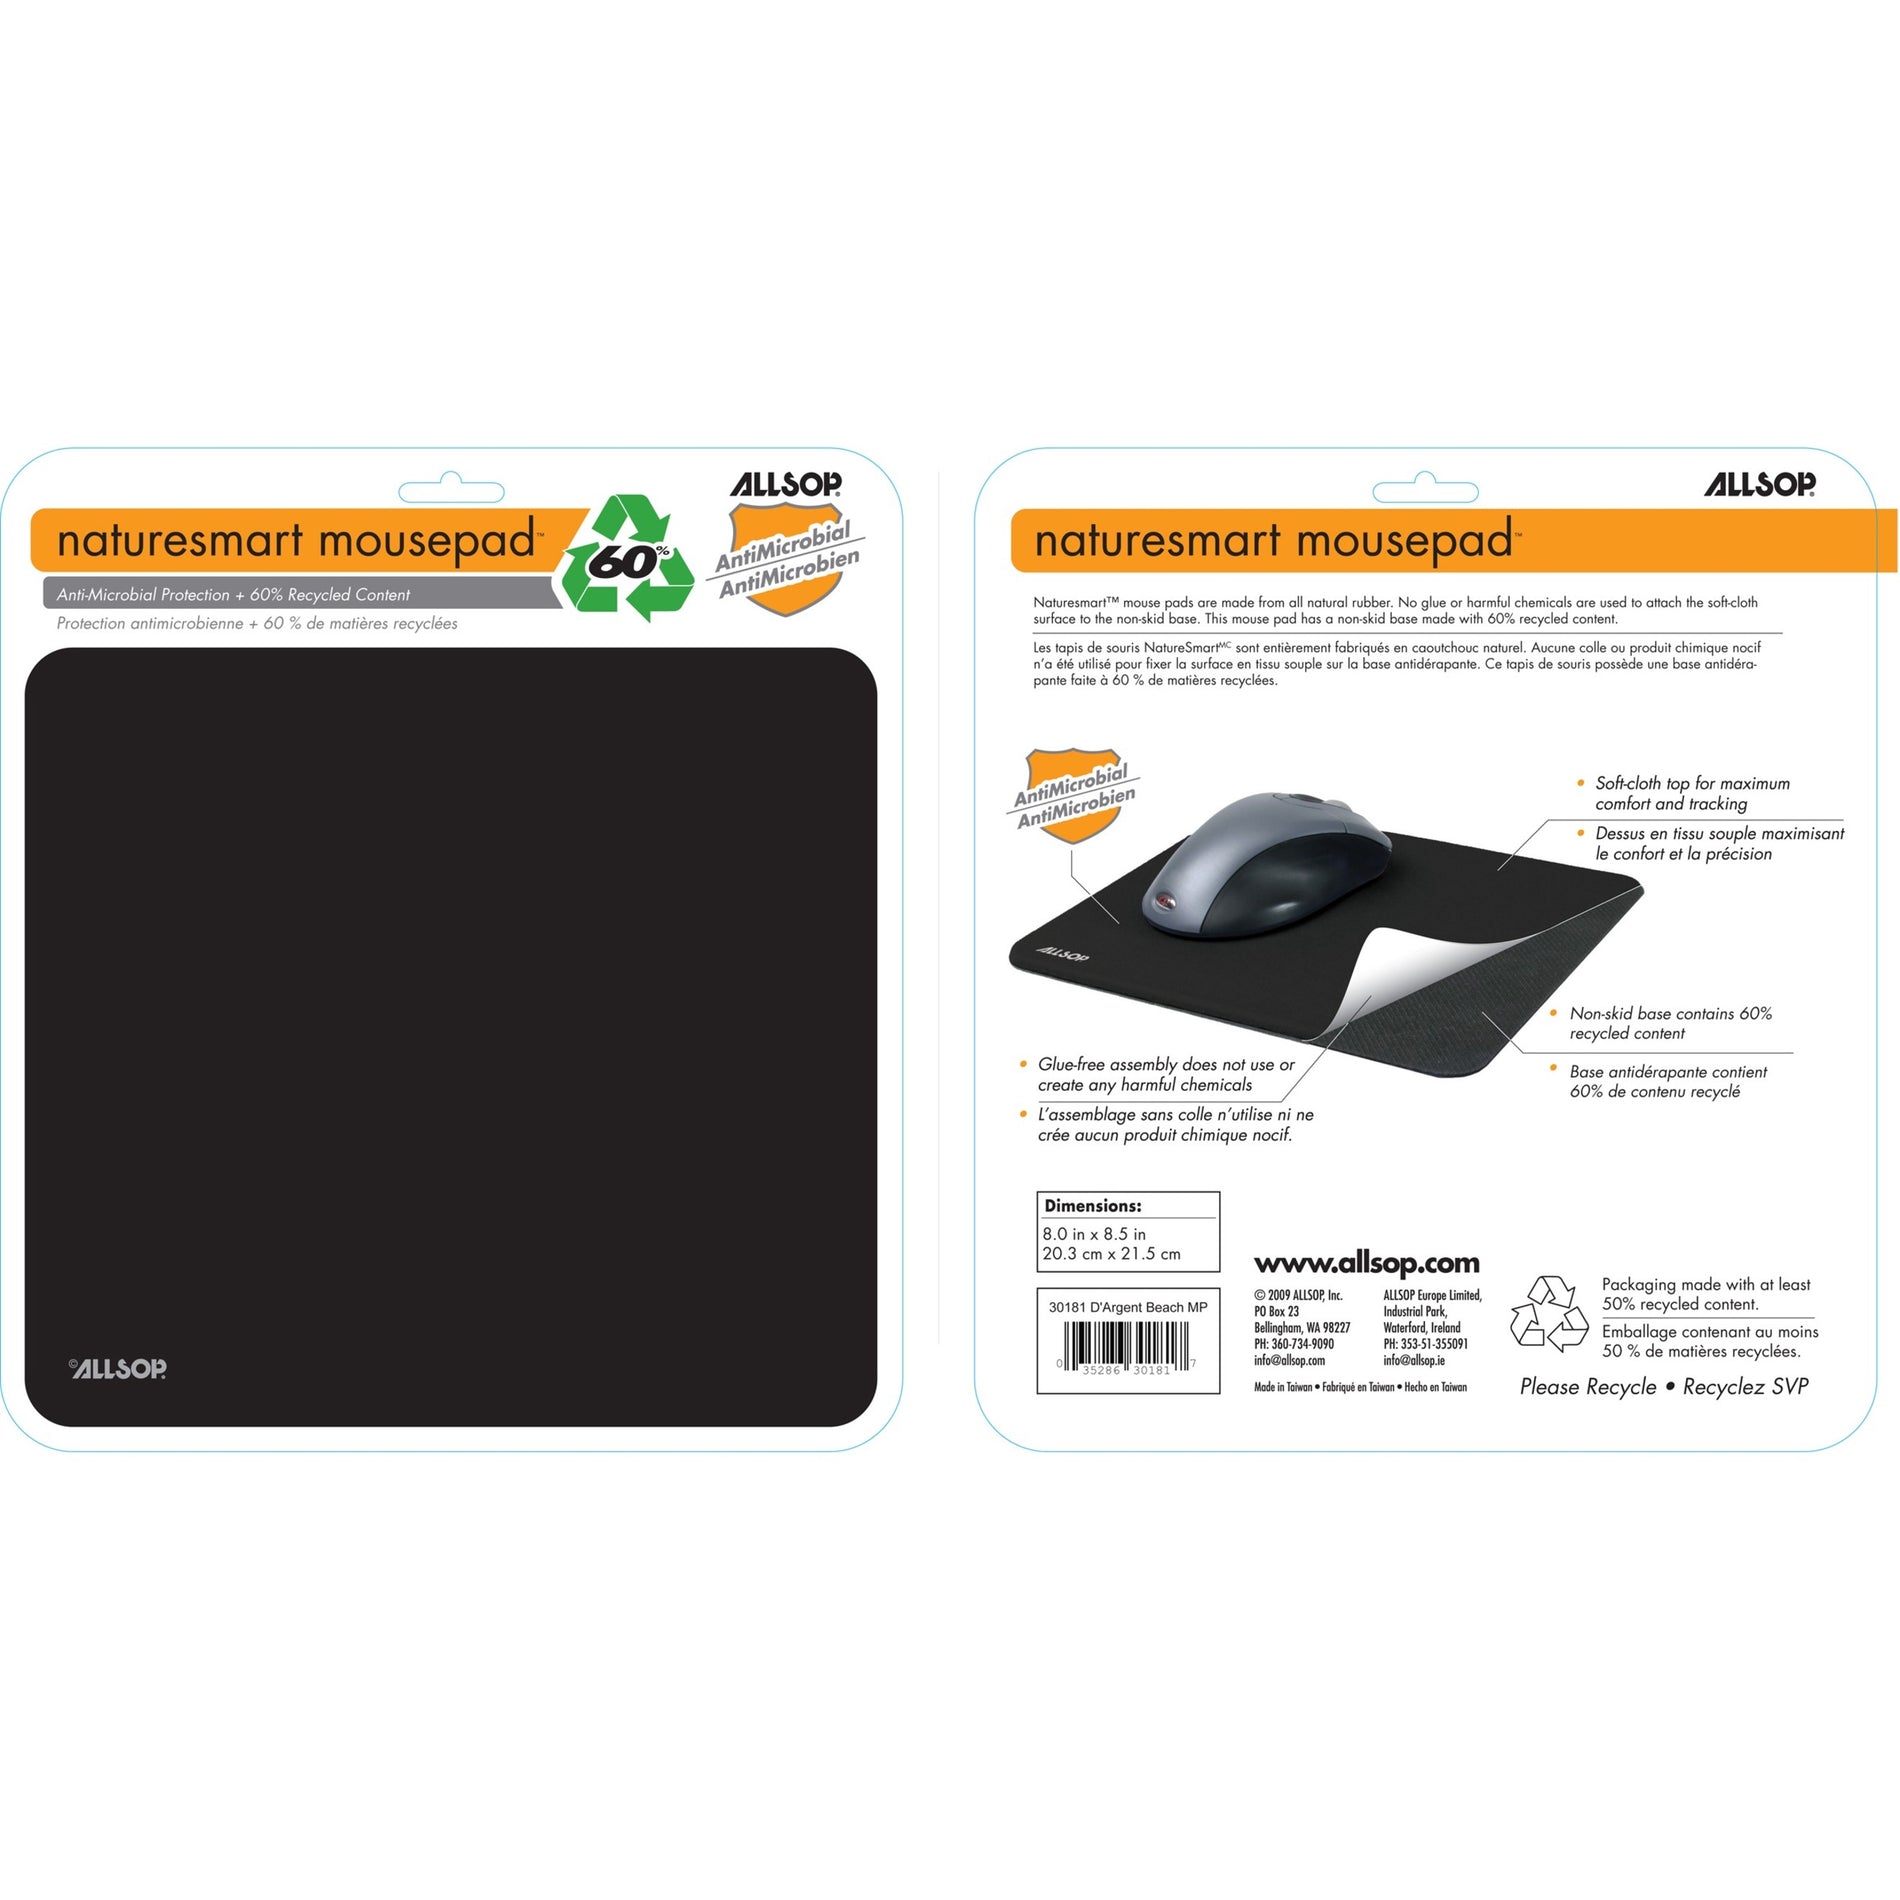 Allsop 28229 Basic Mousepad - Black, Specially Woven Surface for Better Mouse Control, Techrip Base